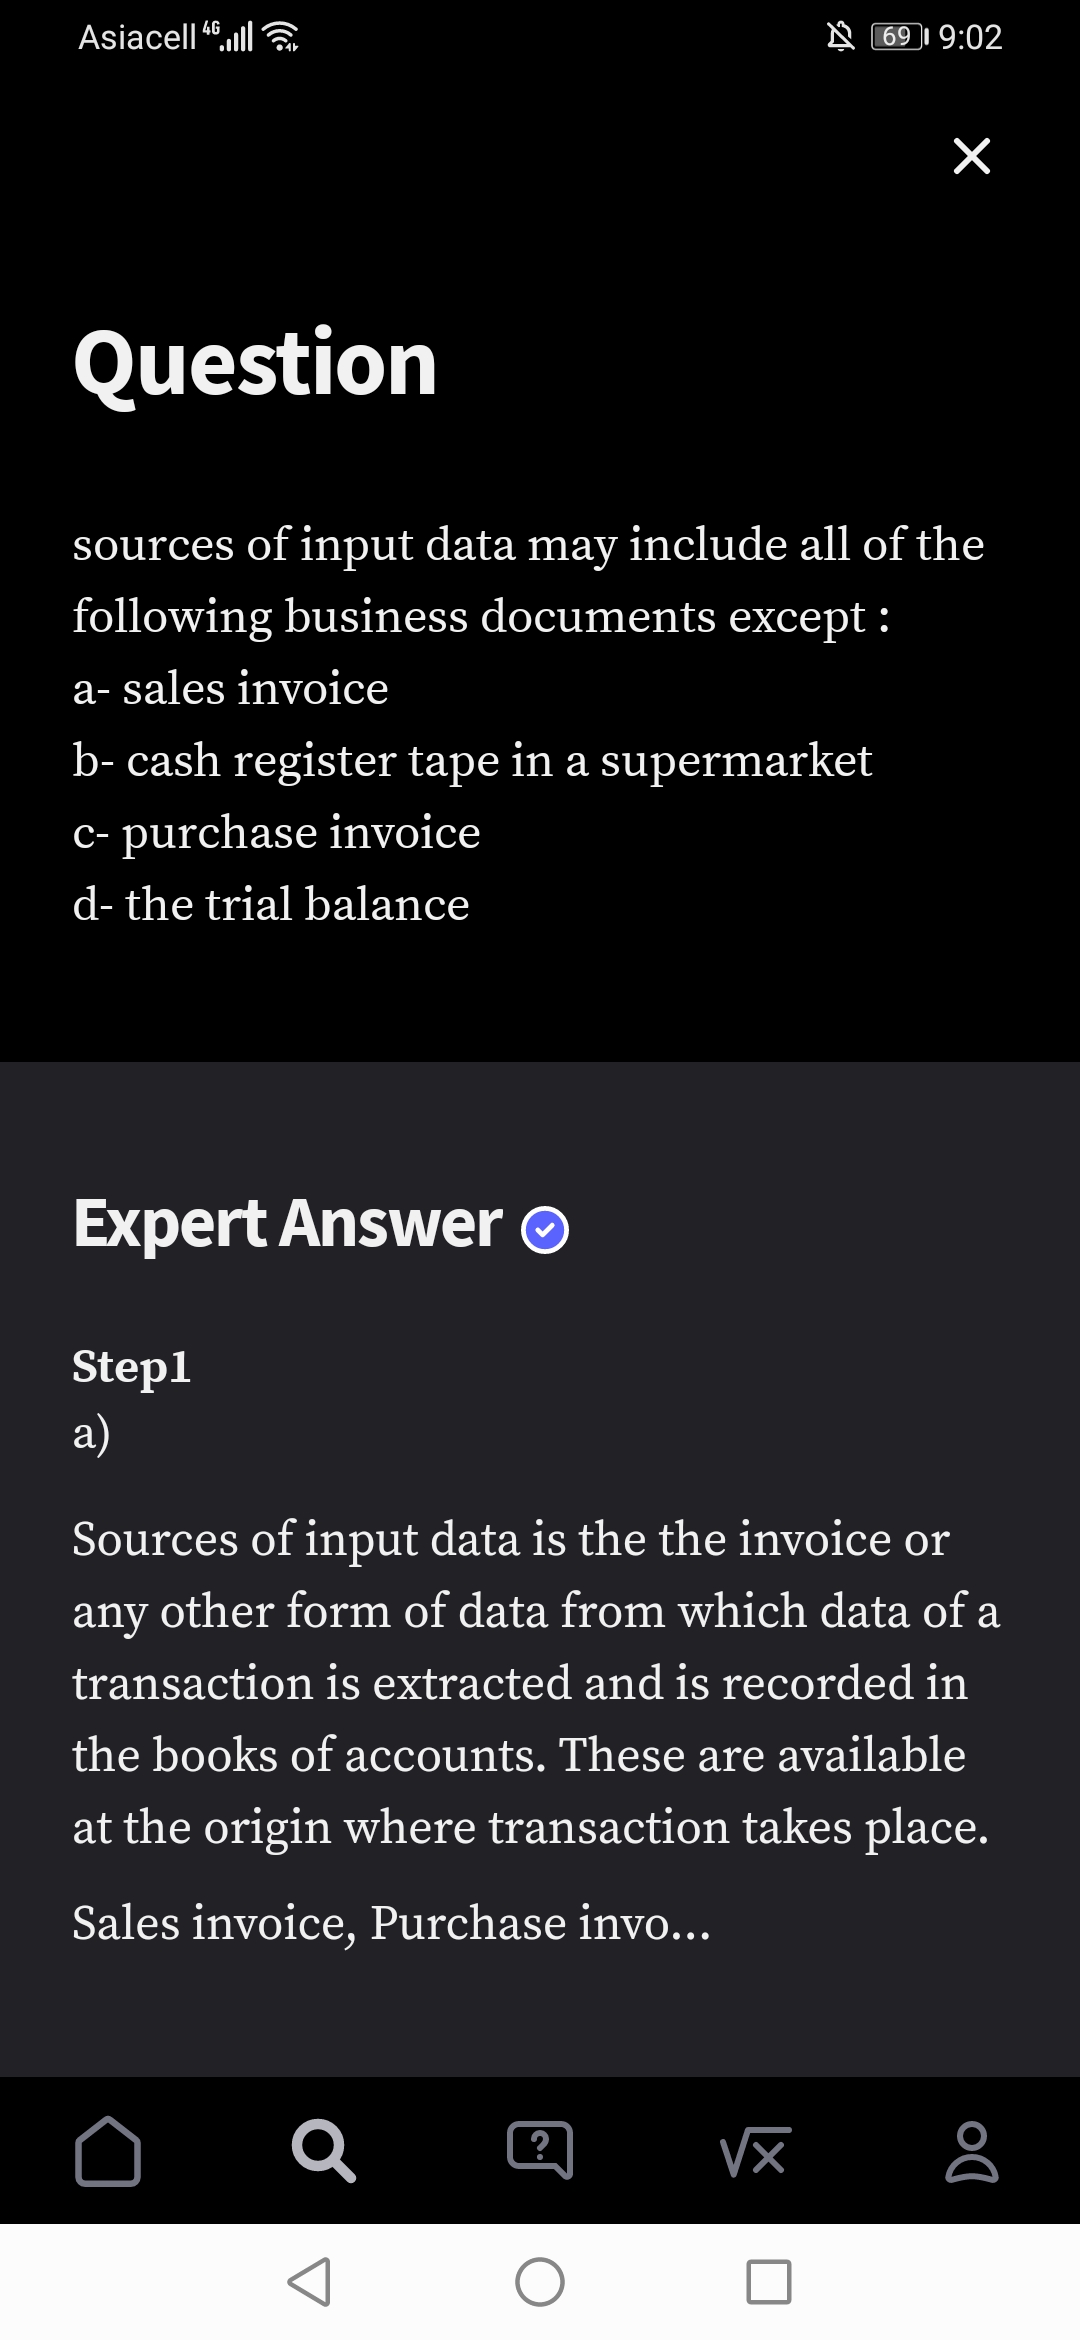 Asiacell ,ll
4G
69 I 9:02
Question
sources of input data may include all of the
following business documents except :
a- sales invoice
b- cash register tape in a supermarket
c- purchase invoice
d- the trial balance
Expert Answer
Step1
a)
Sources of input data is the the invoice or
any
other form of data from which data of a
transaction is extracted and is recorded in
the books of accounts. These are available
at the origin where transaction takes place.
Sales invoice, Purchase invo...
?
